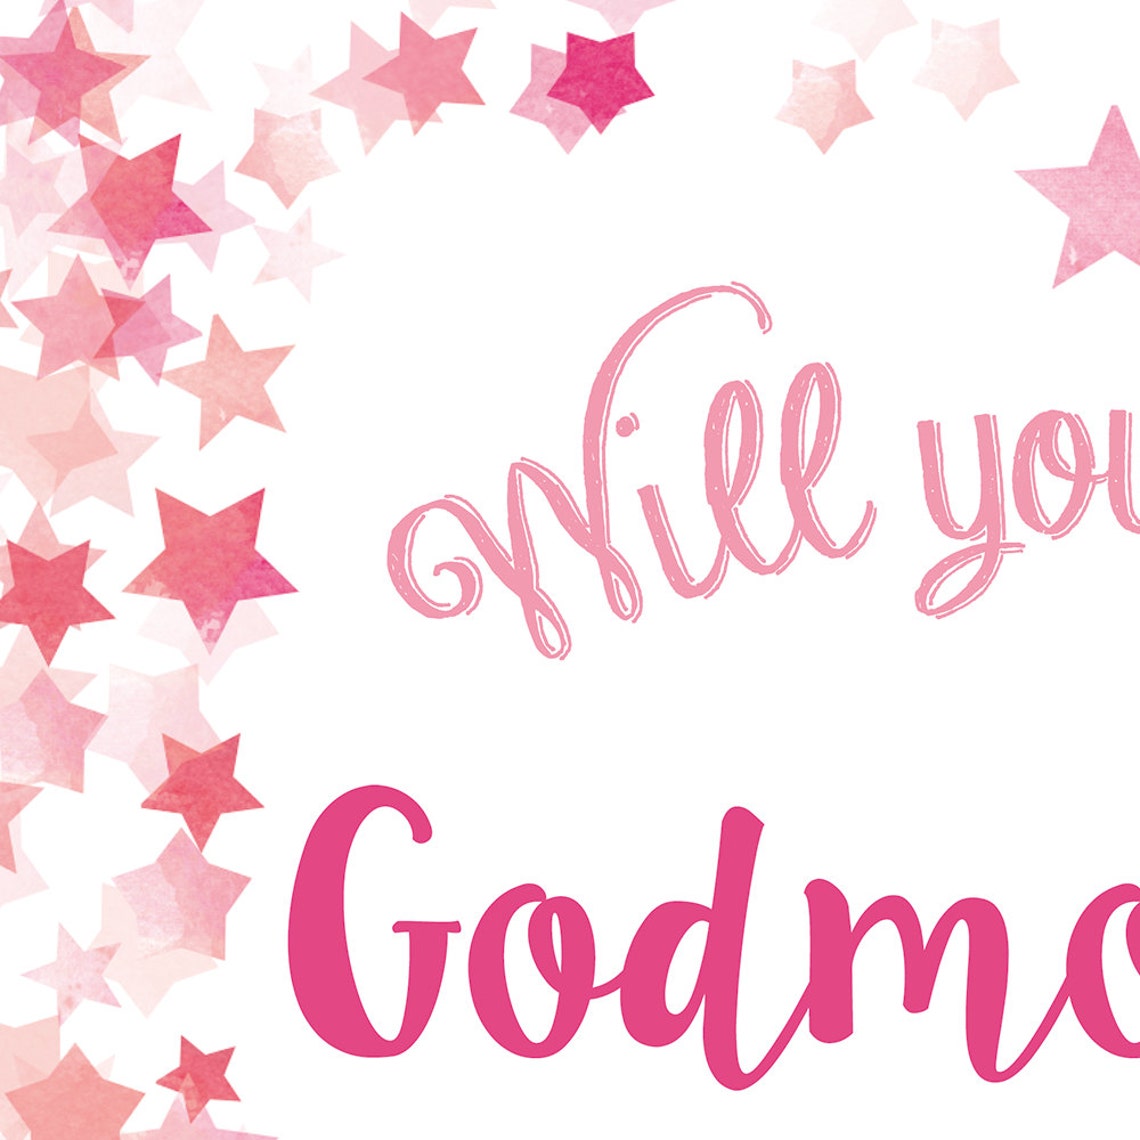 will-you-be-my-godmother-card-godmother-card-a5-etsy